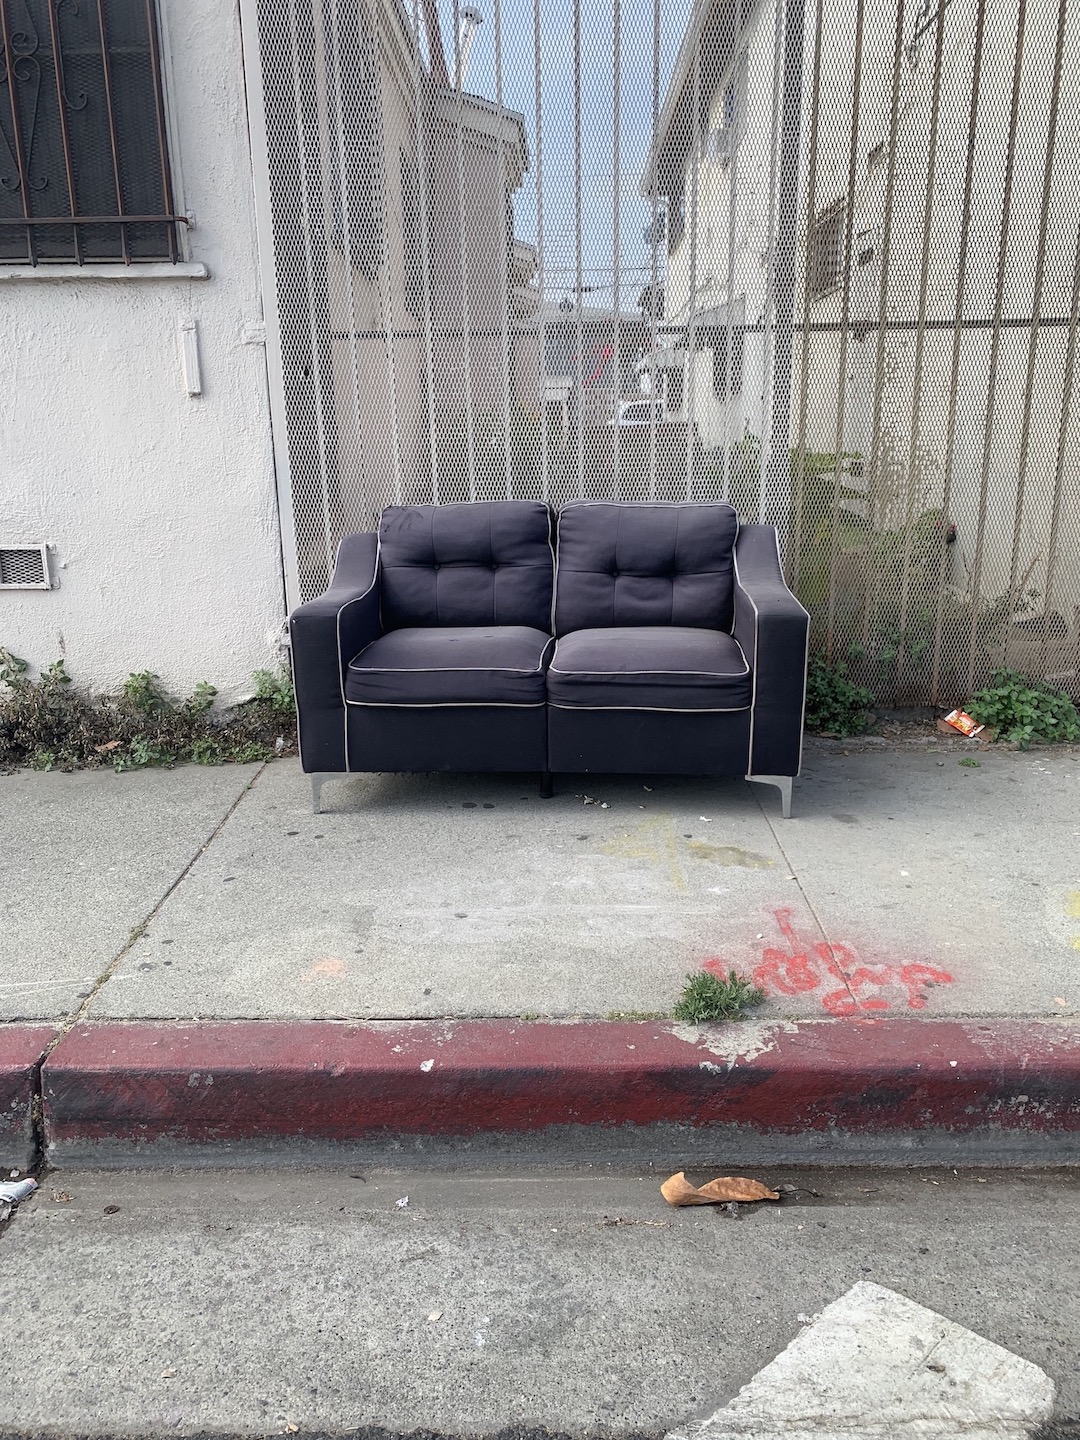 street couch in south los angeles